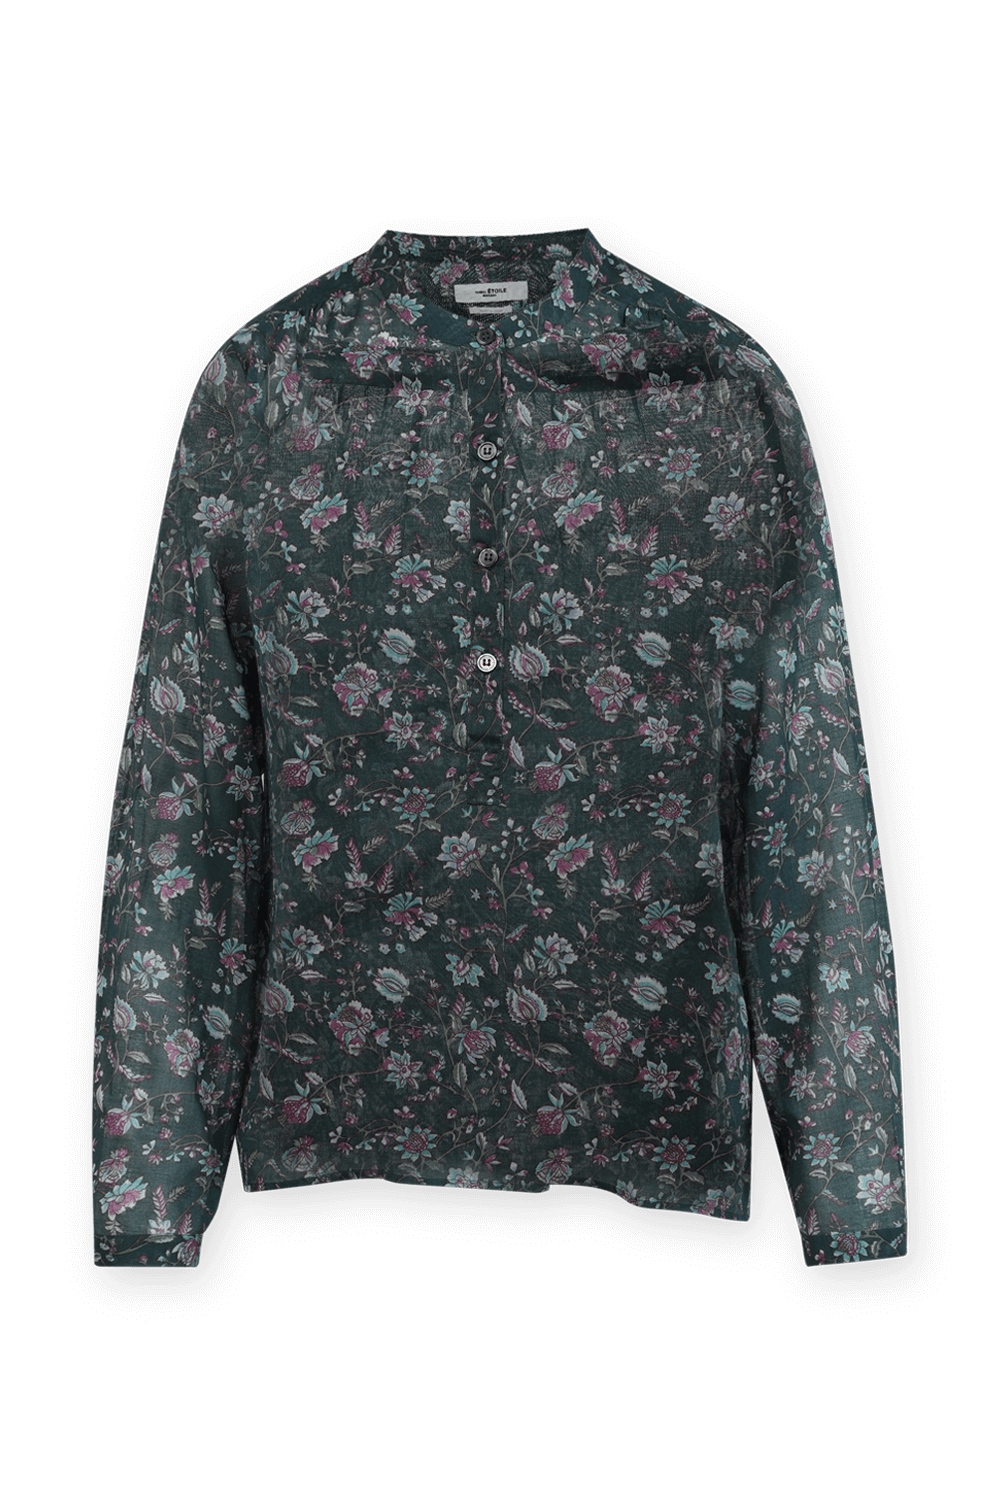 Maria Flower Print Shirt in Green and Pink ISABEL MARANT